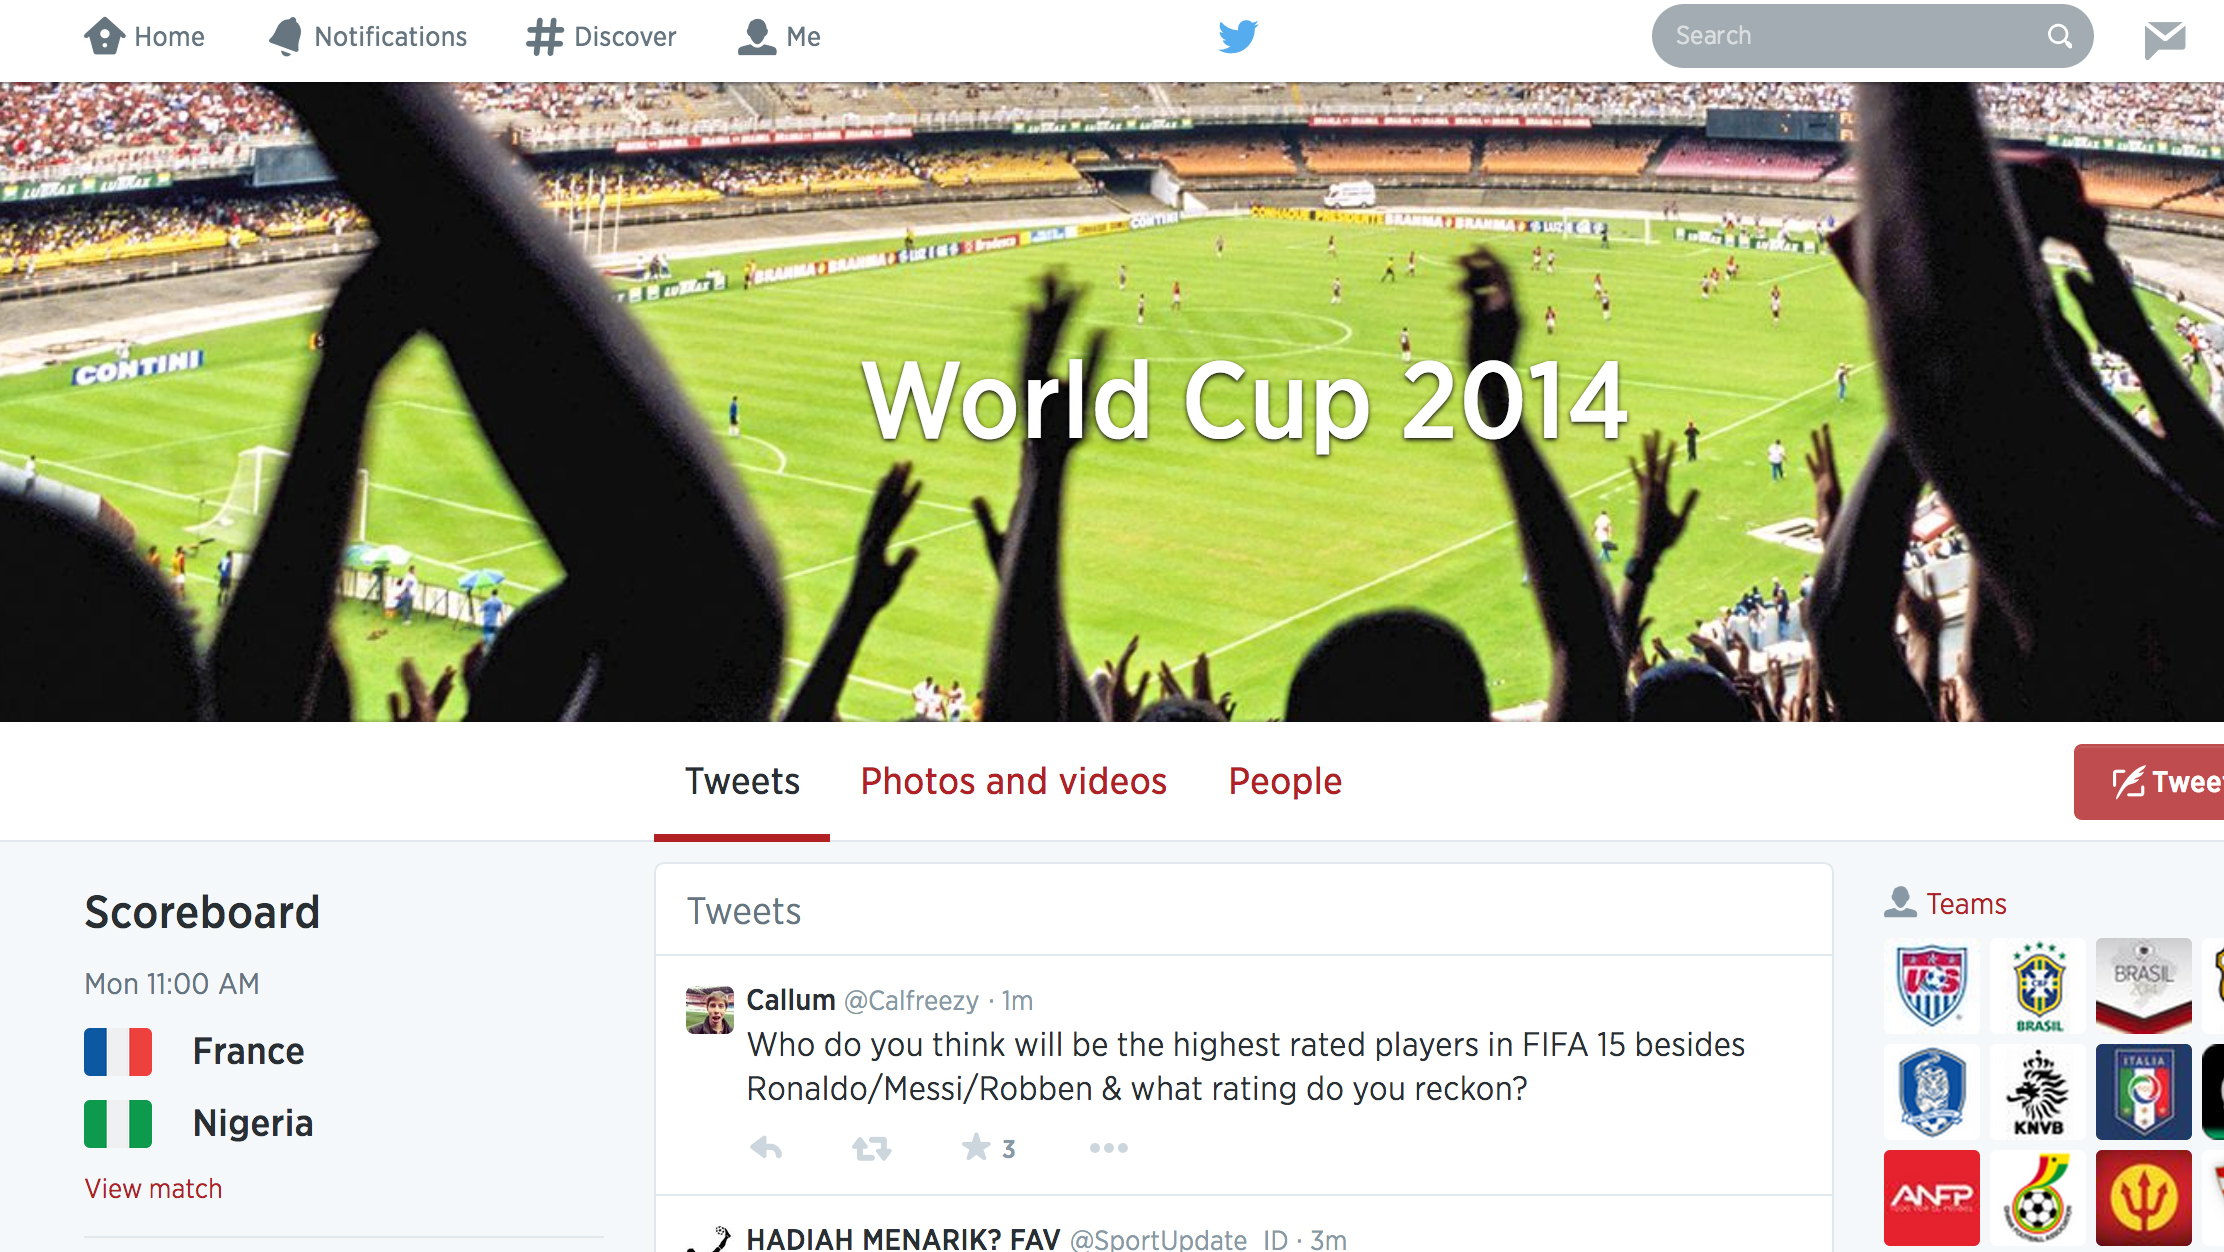 World Cup 2014 breaks Super Bowl record on Twitter CBS News